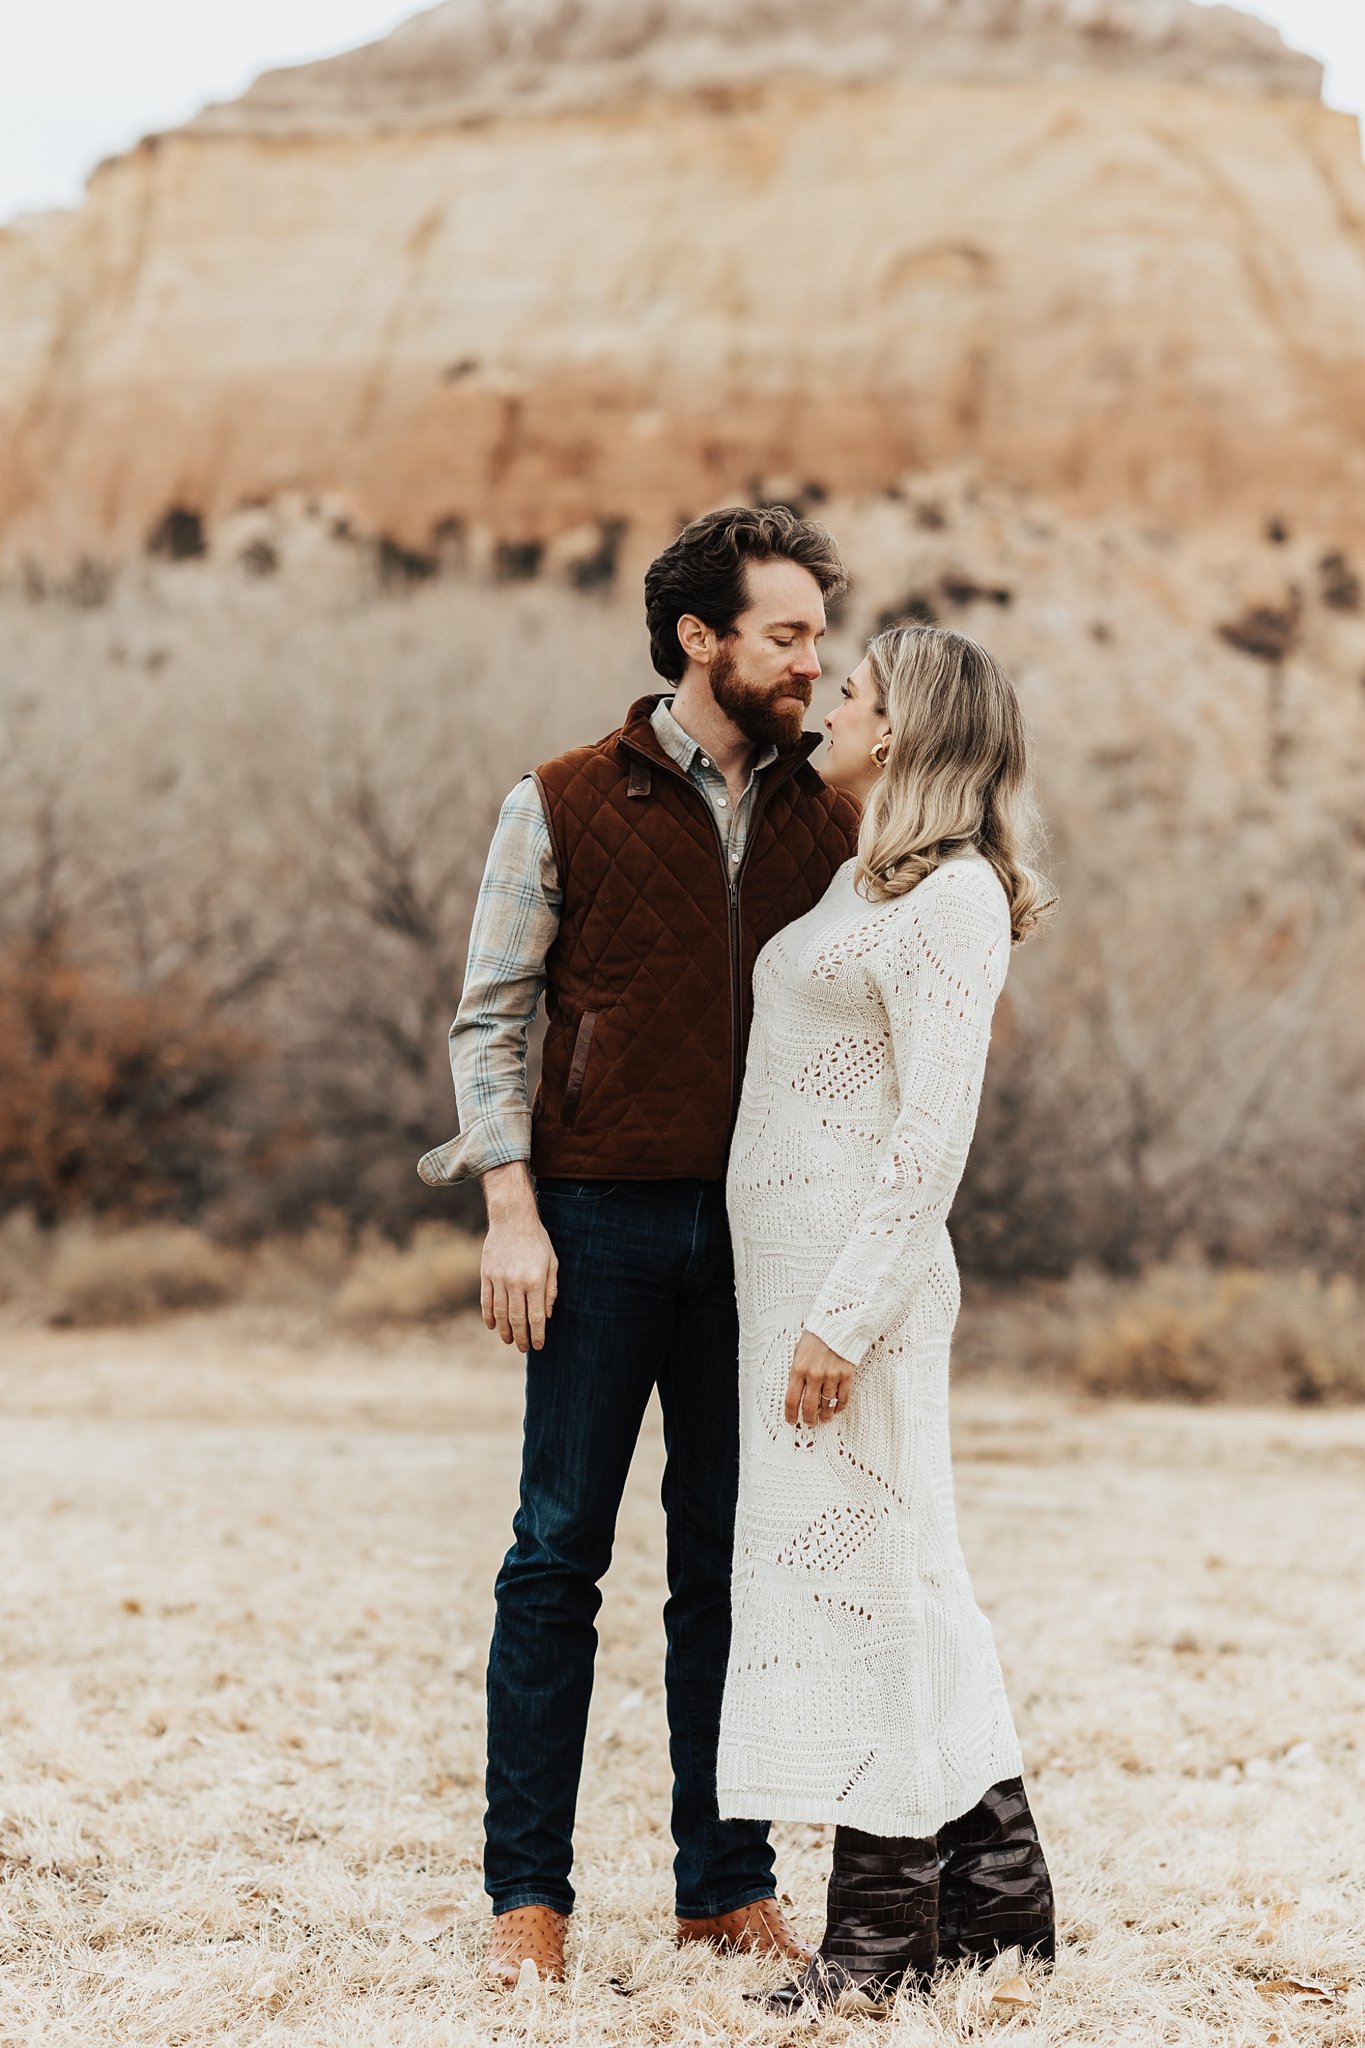 Alicia+lucia+photography+-+albuquerque+wedding+photographer+-+santa+fe+wedding+photography+-+new+mexico+wedding+photographer+-+new+mexico+wedding+-+southwest+engagement+-+ghost+ranch+engagement+-+ghost+ranch+wedding_0006.jpg